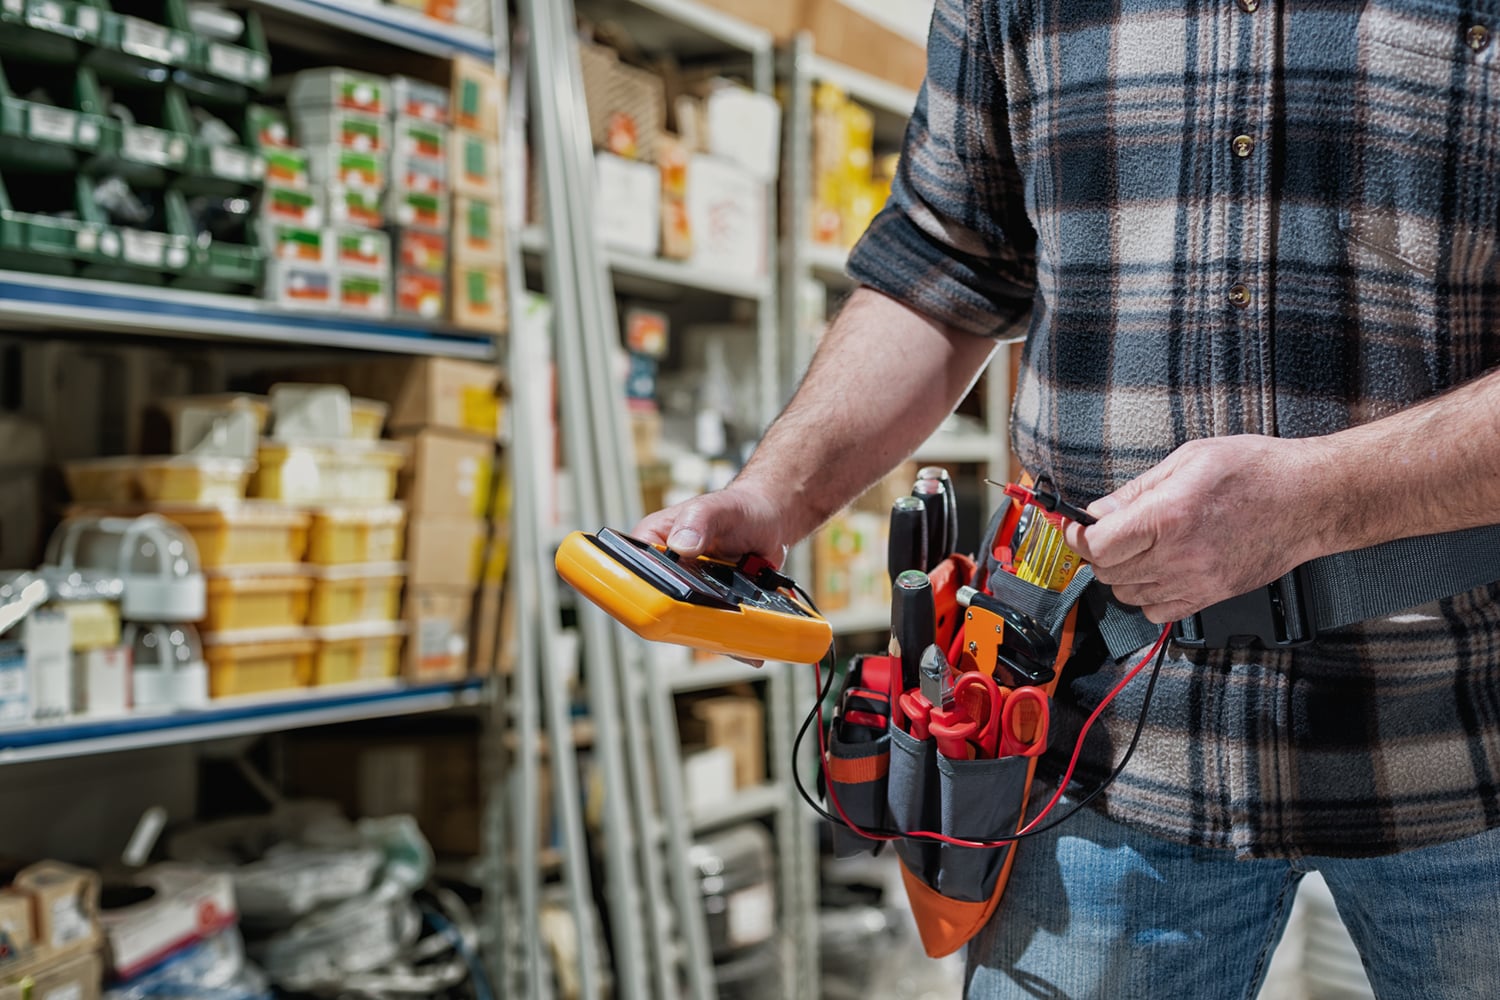 This is the cover photo for our Best Electrician Tool Belt article. It shows an electrician in a store isle, holding a multimeter, wearing a tool belt with tools inside. The background has several shelves of supplies.